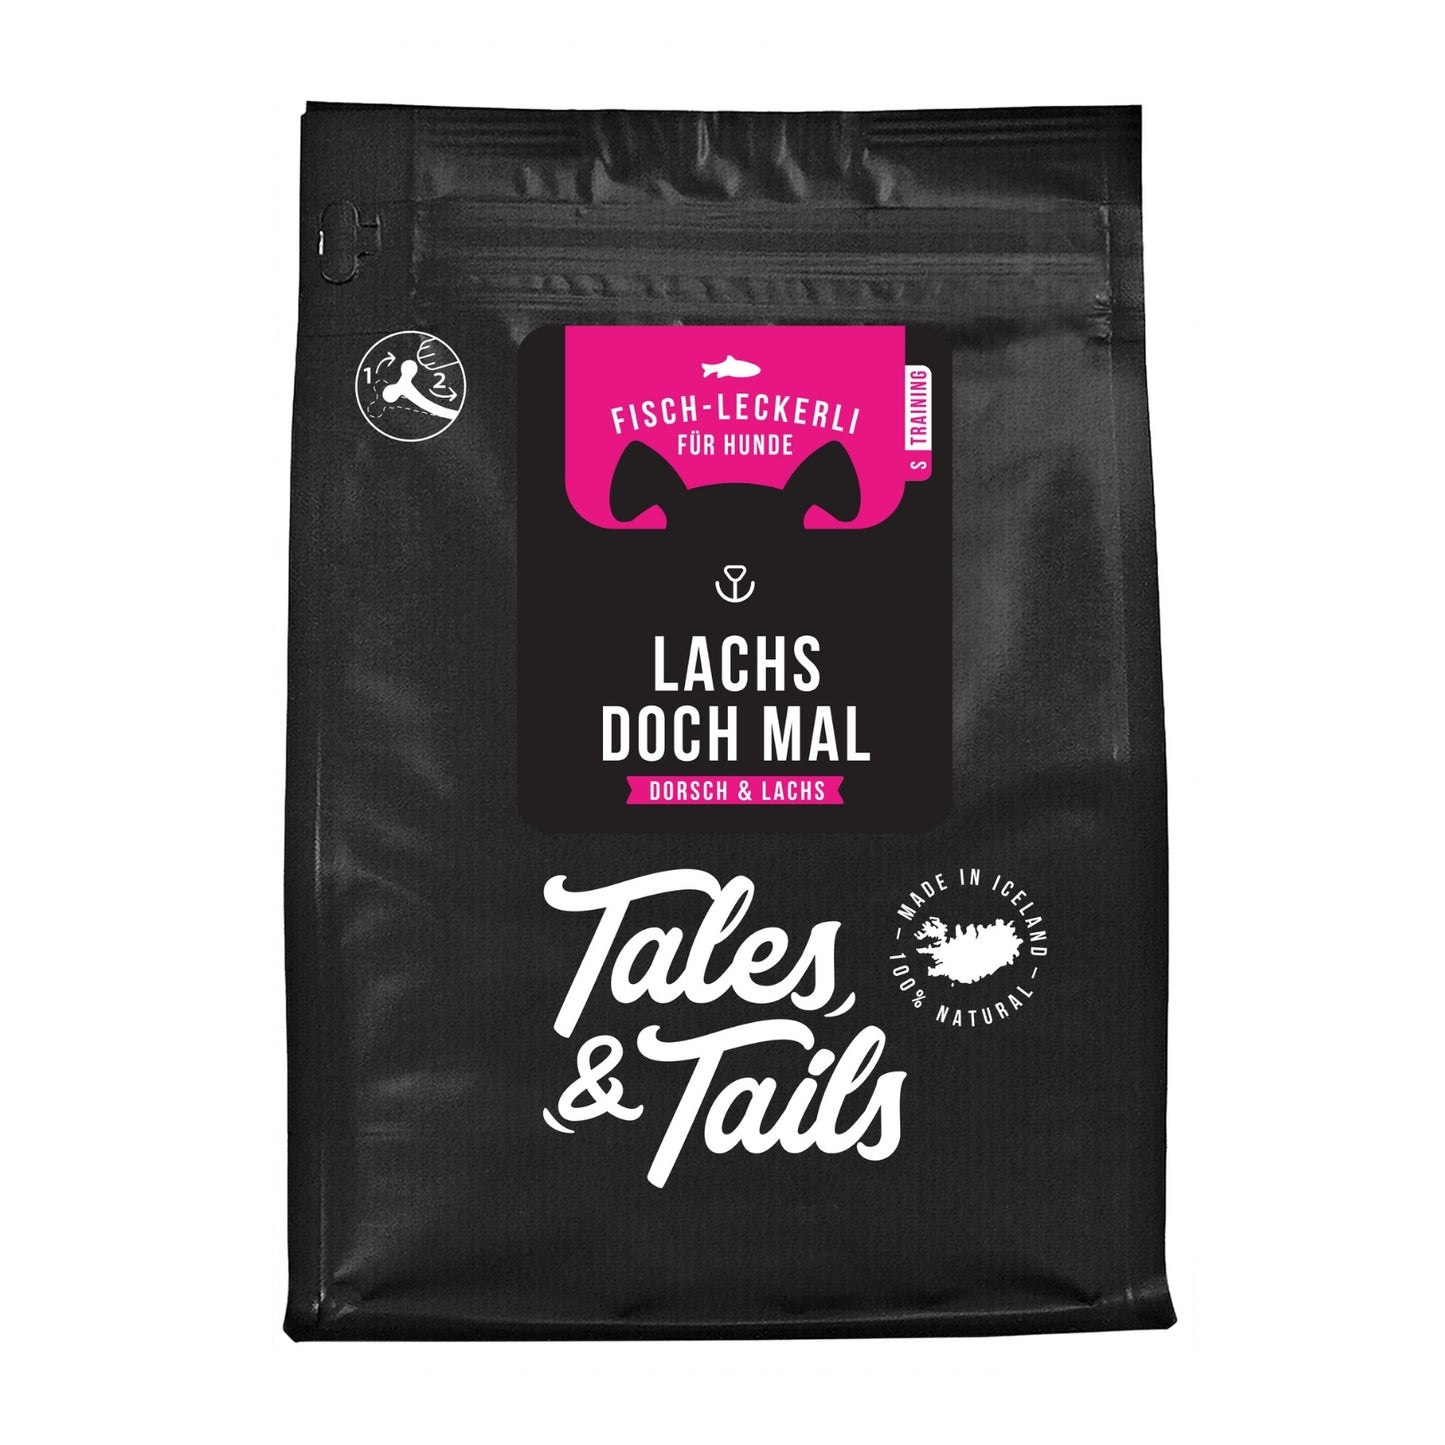 Tales & Tails Leckerli Lachs Packung